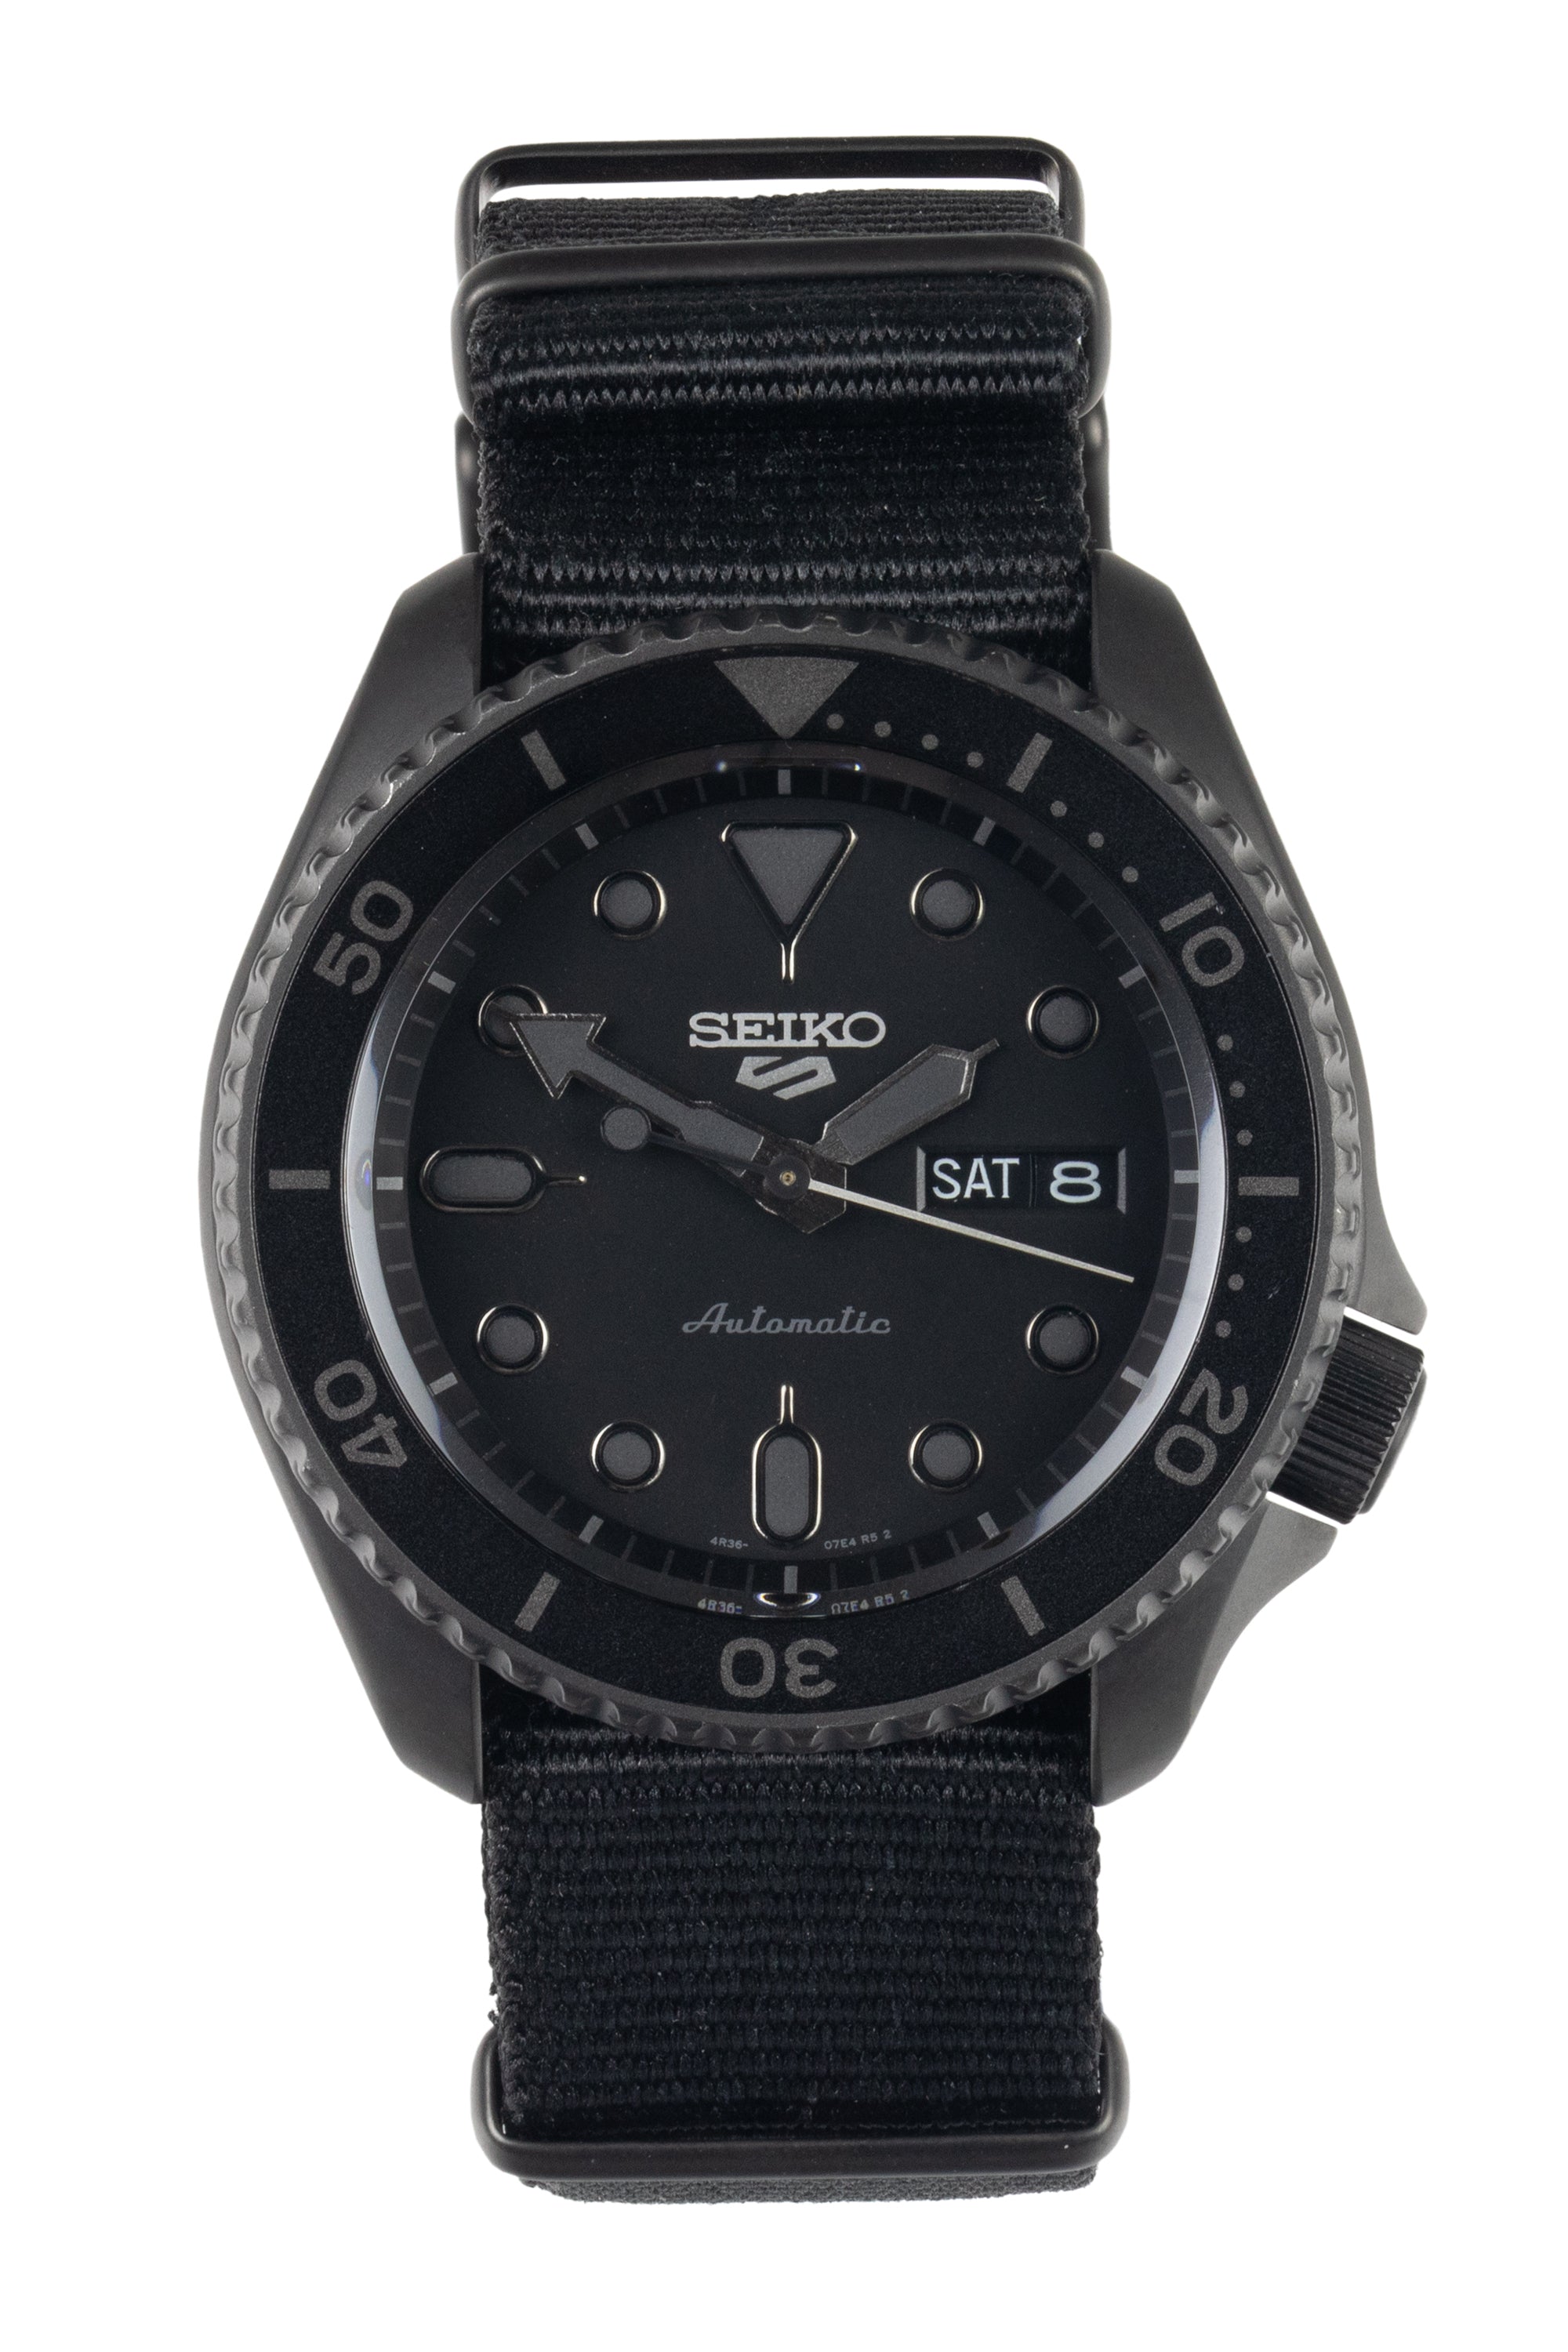 Seiko 5 Sports 42mm Watch | Automatic | Watch Obsession